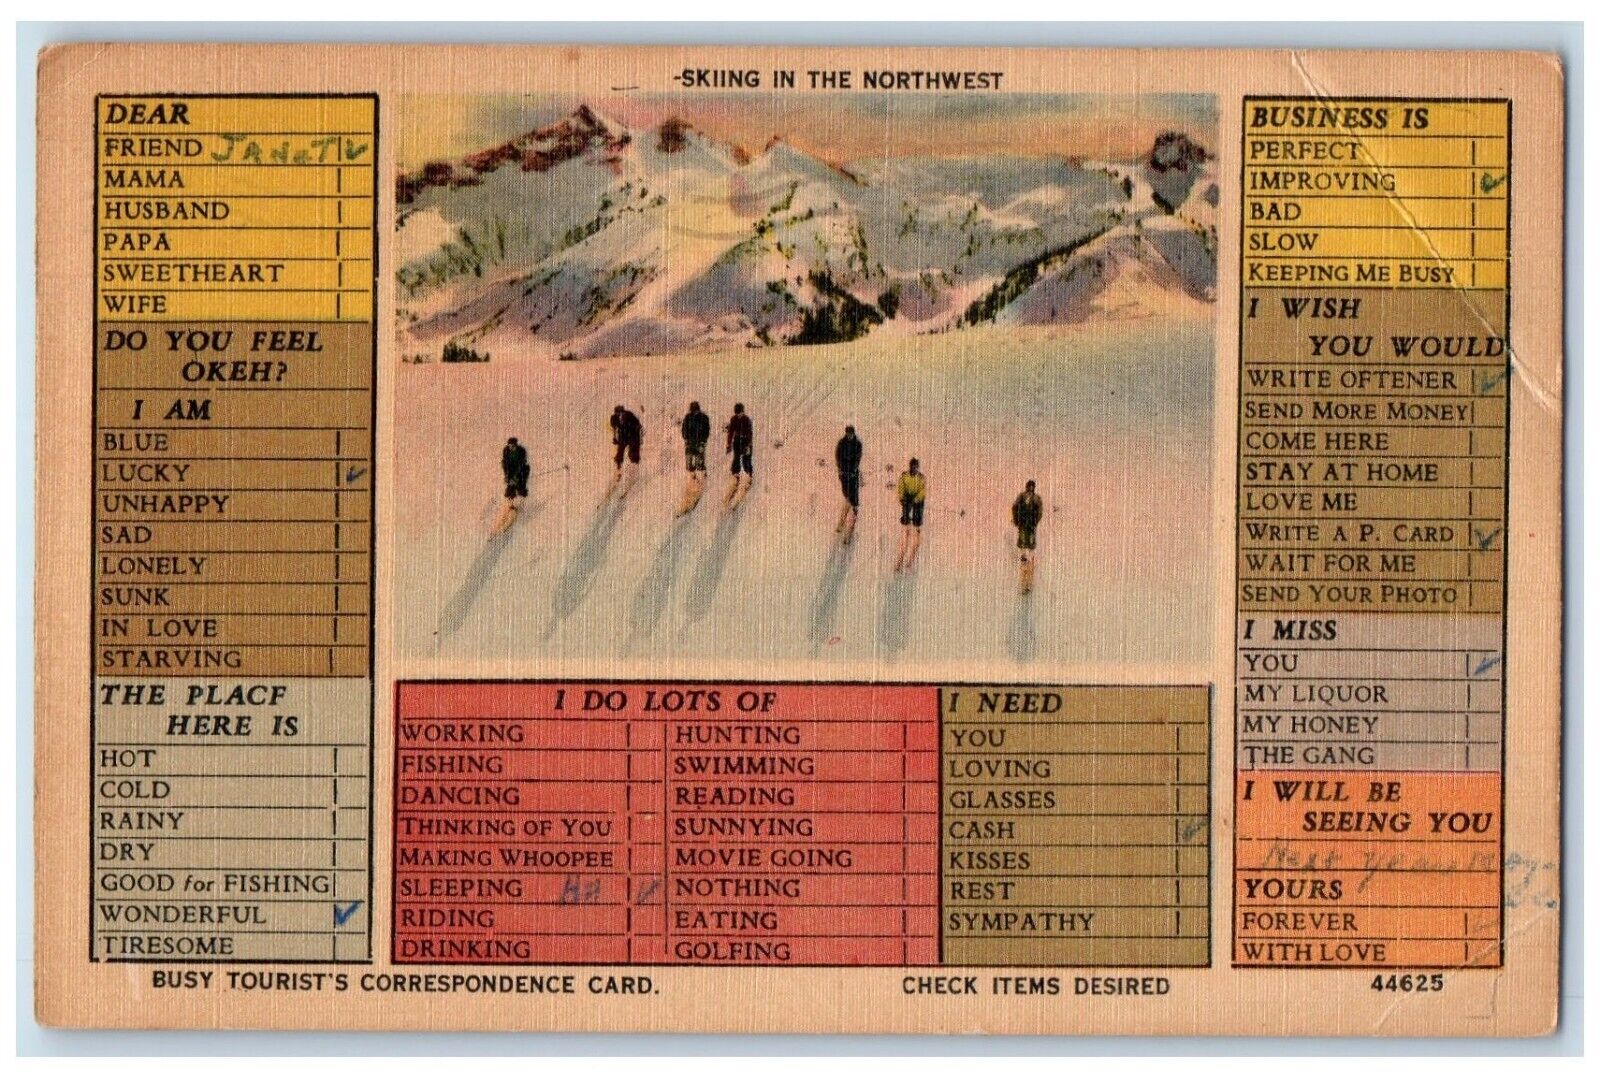 1958 Skiing In The Northwest Corresponded Checklist Fossil Oregon OR Postcard